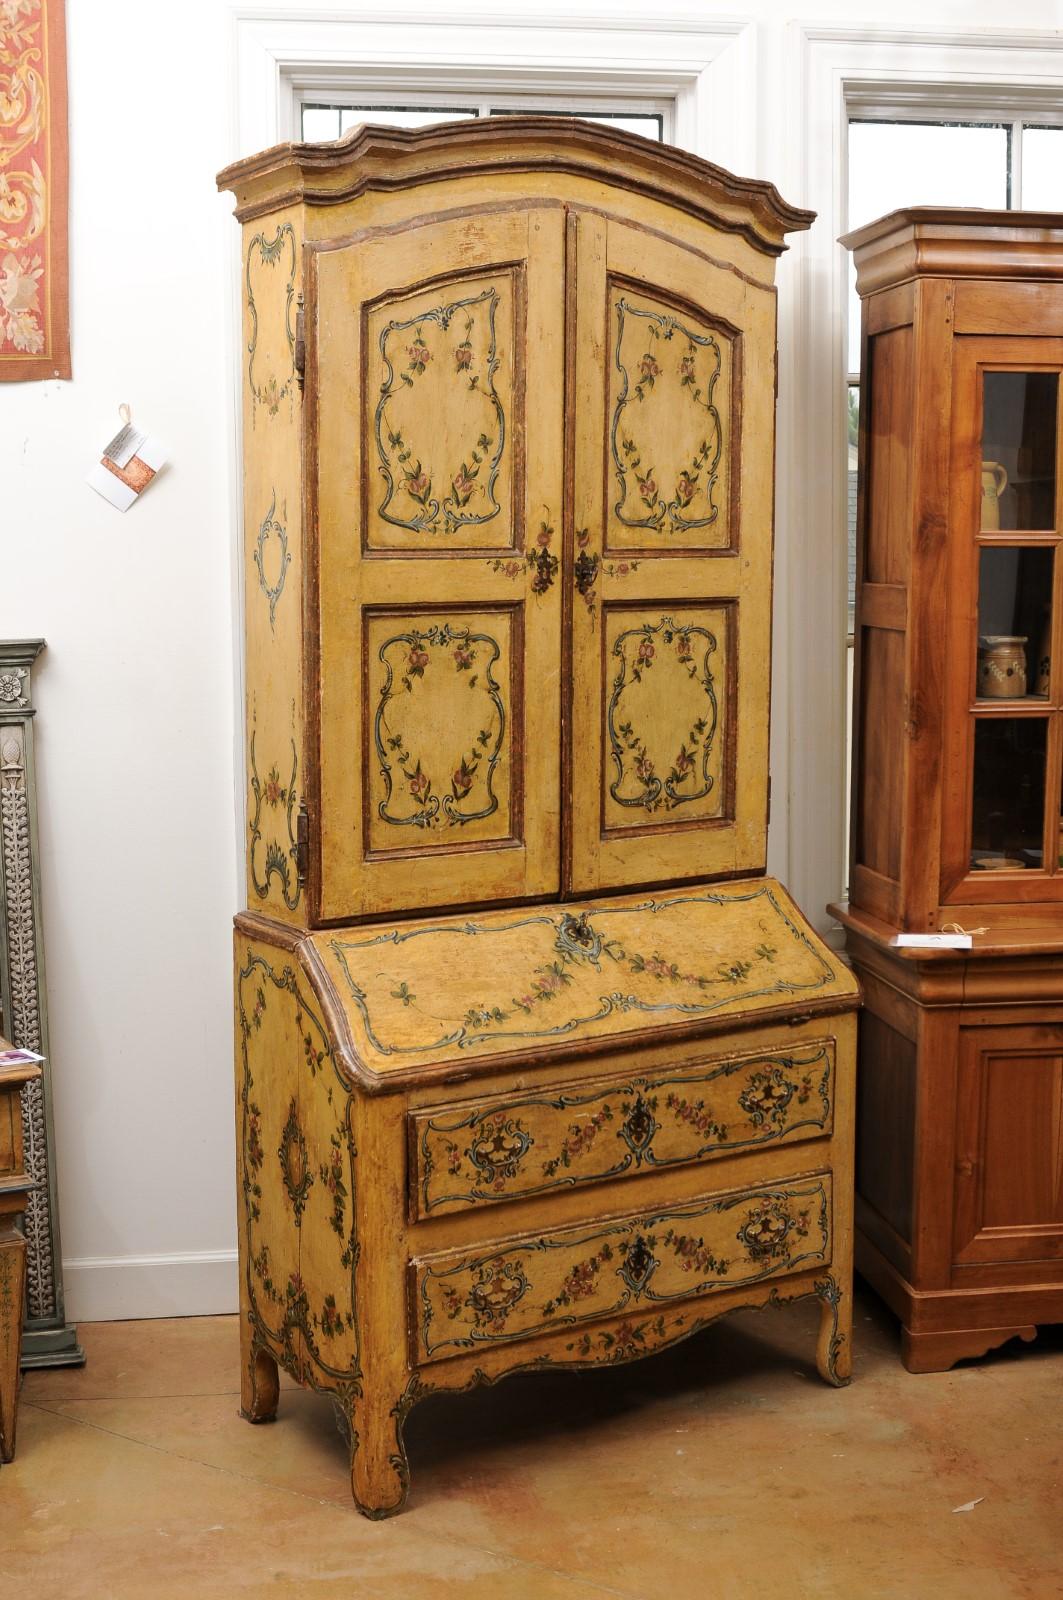 18th Century Italian 1760s Rococo Period Tall Secrétaire from Genoa with Hand Painted Décor